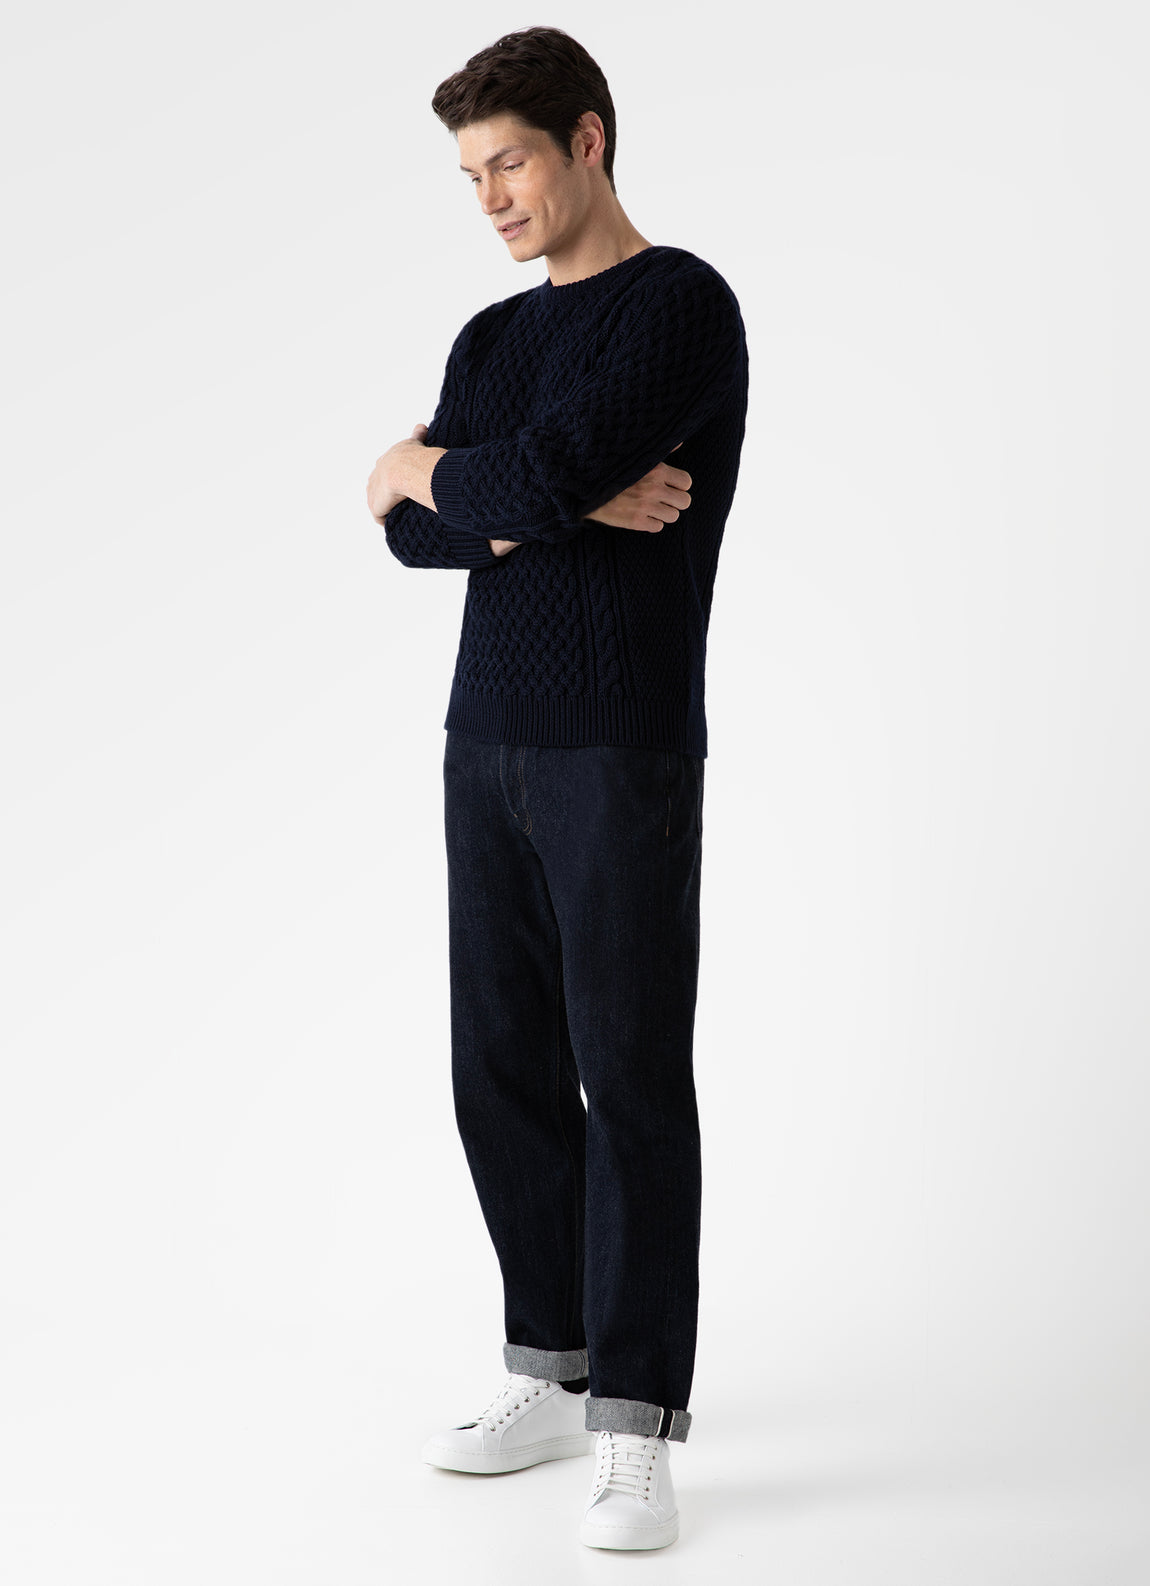 Men's Cable Knit Jumper in Navy